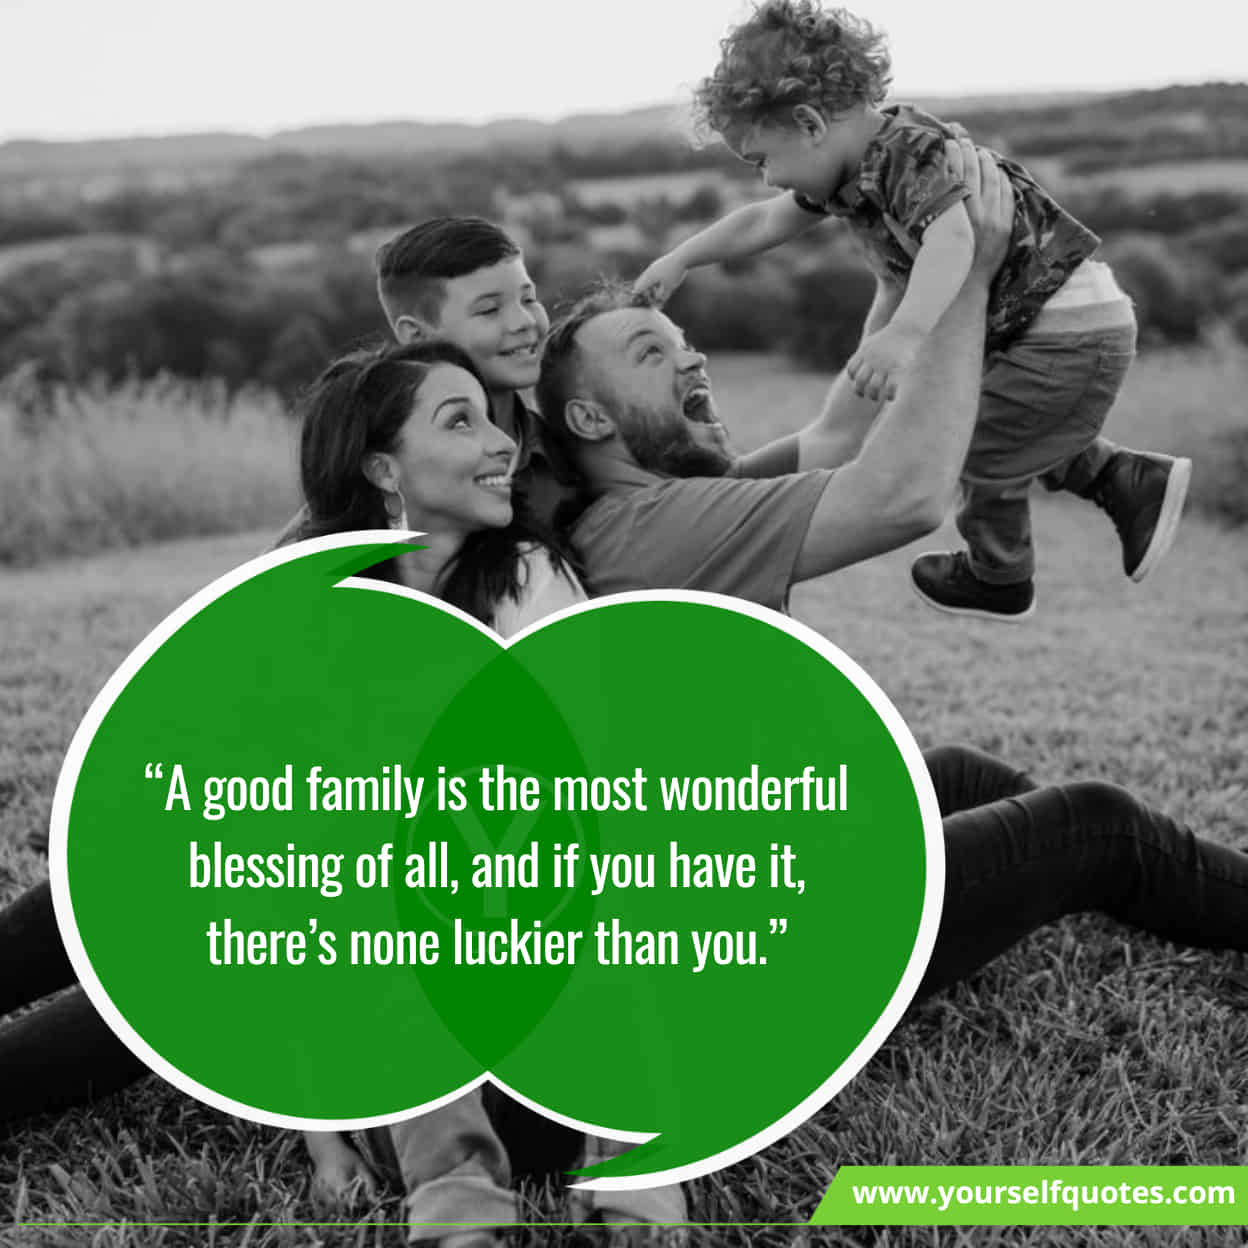 Best Inspiring Quotes On Family